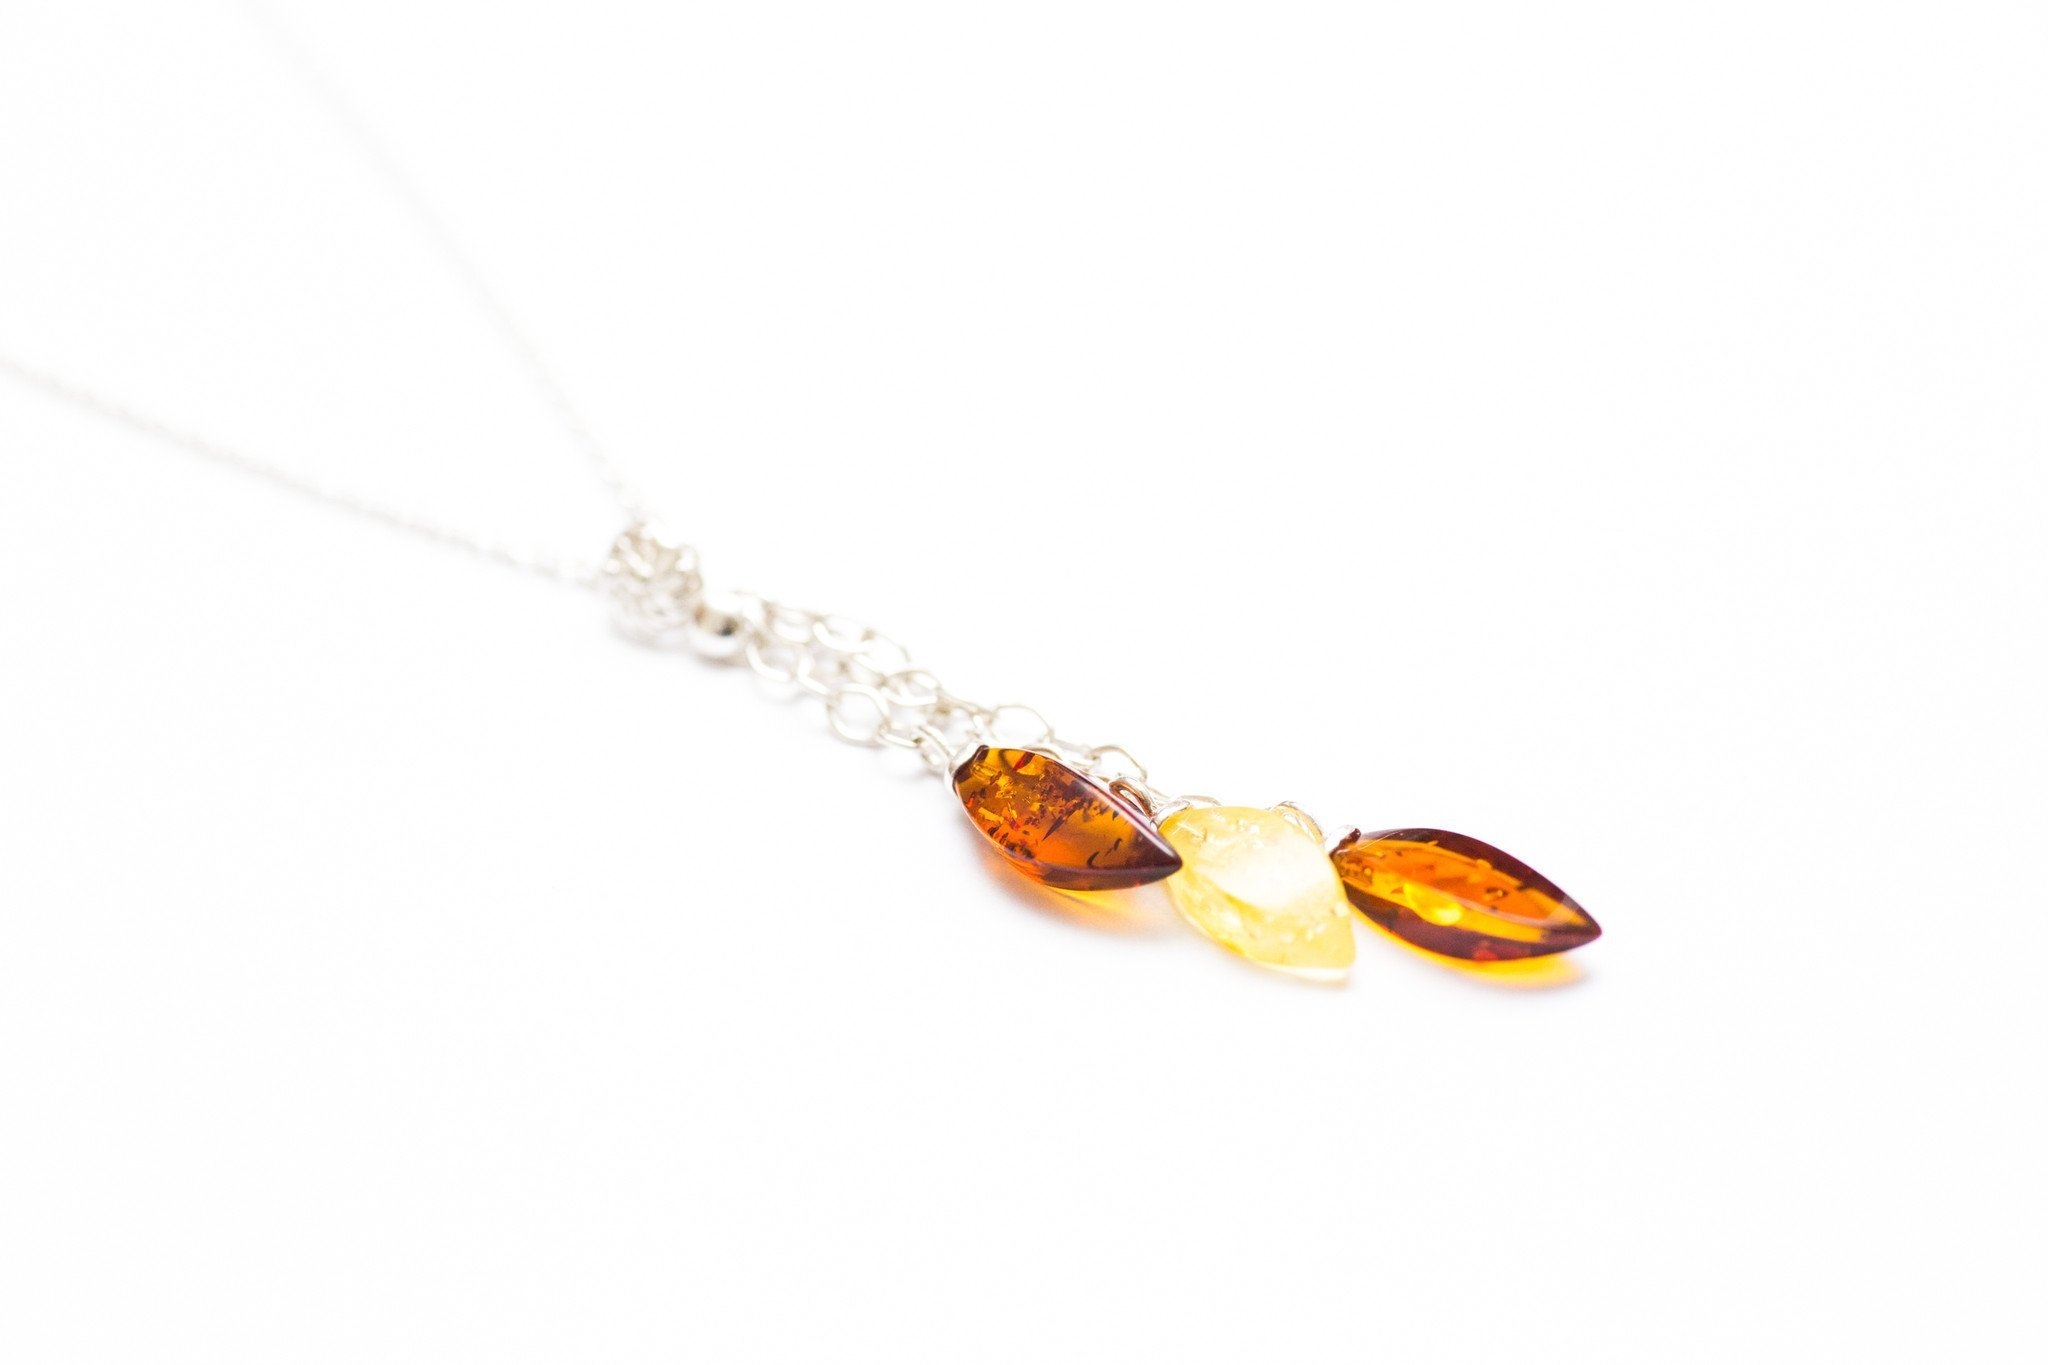 Multicolour Amber Bead Necklace